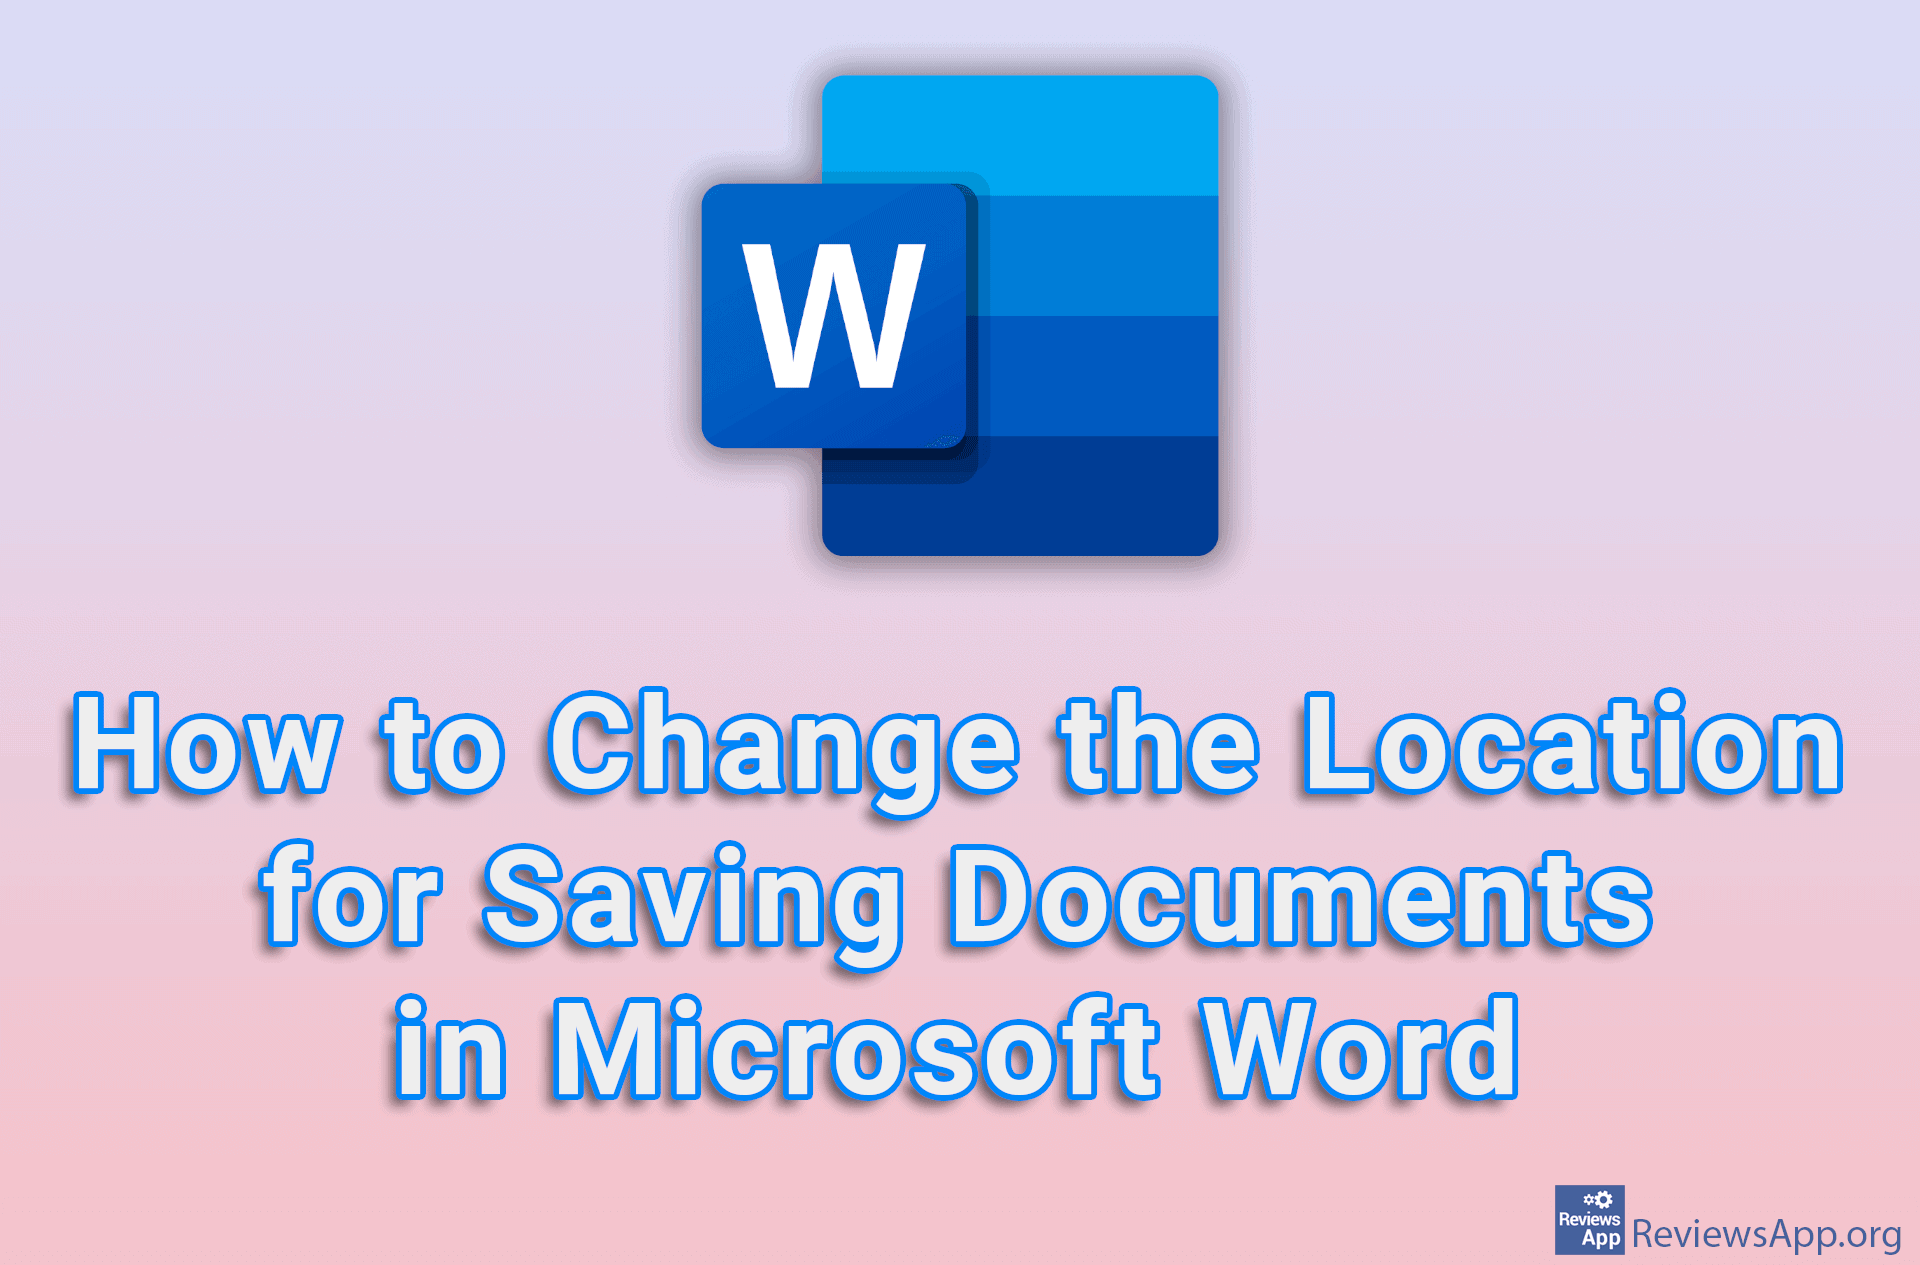 How to Change the Location for Saving Documents in Microsoft Word